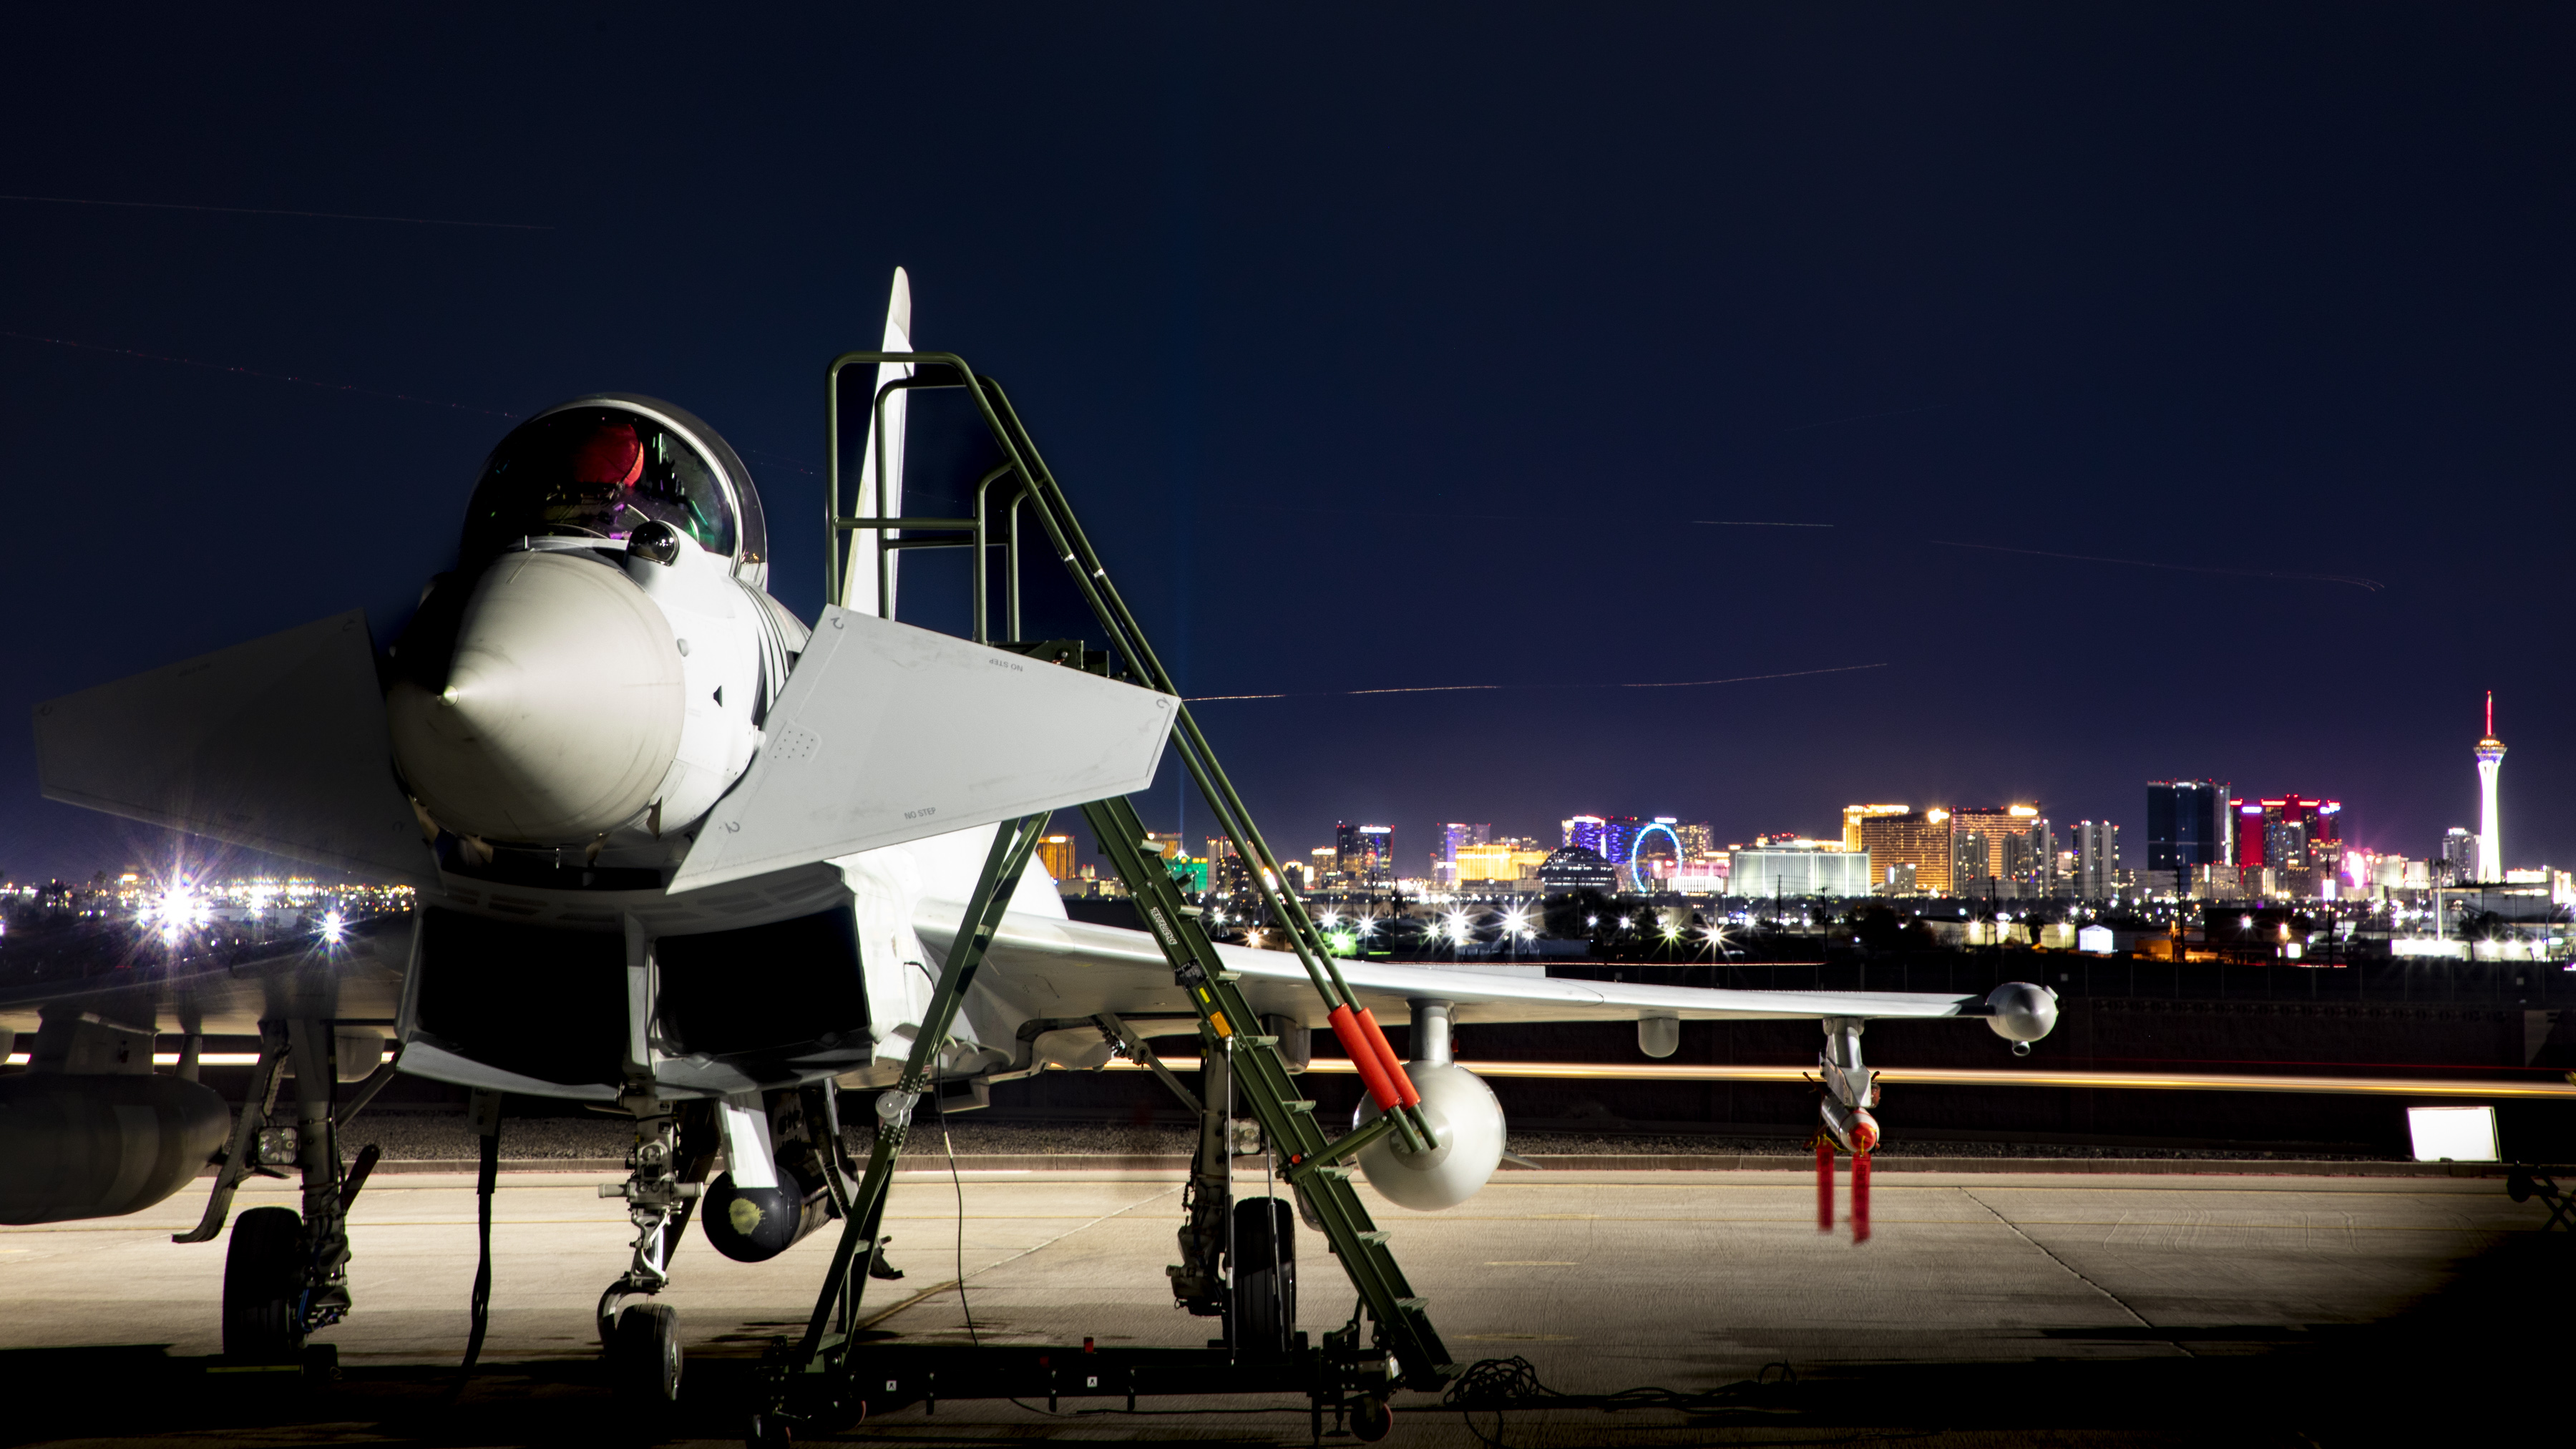 RAF Typhoon on runway at night, cityscape in background